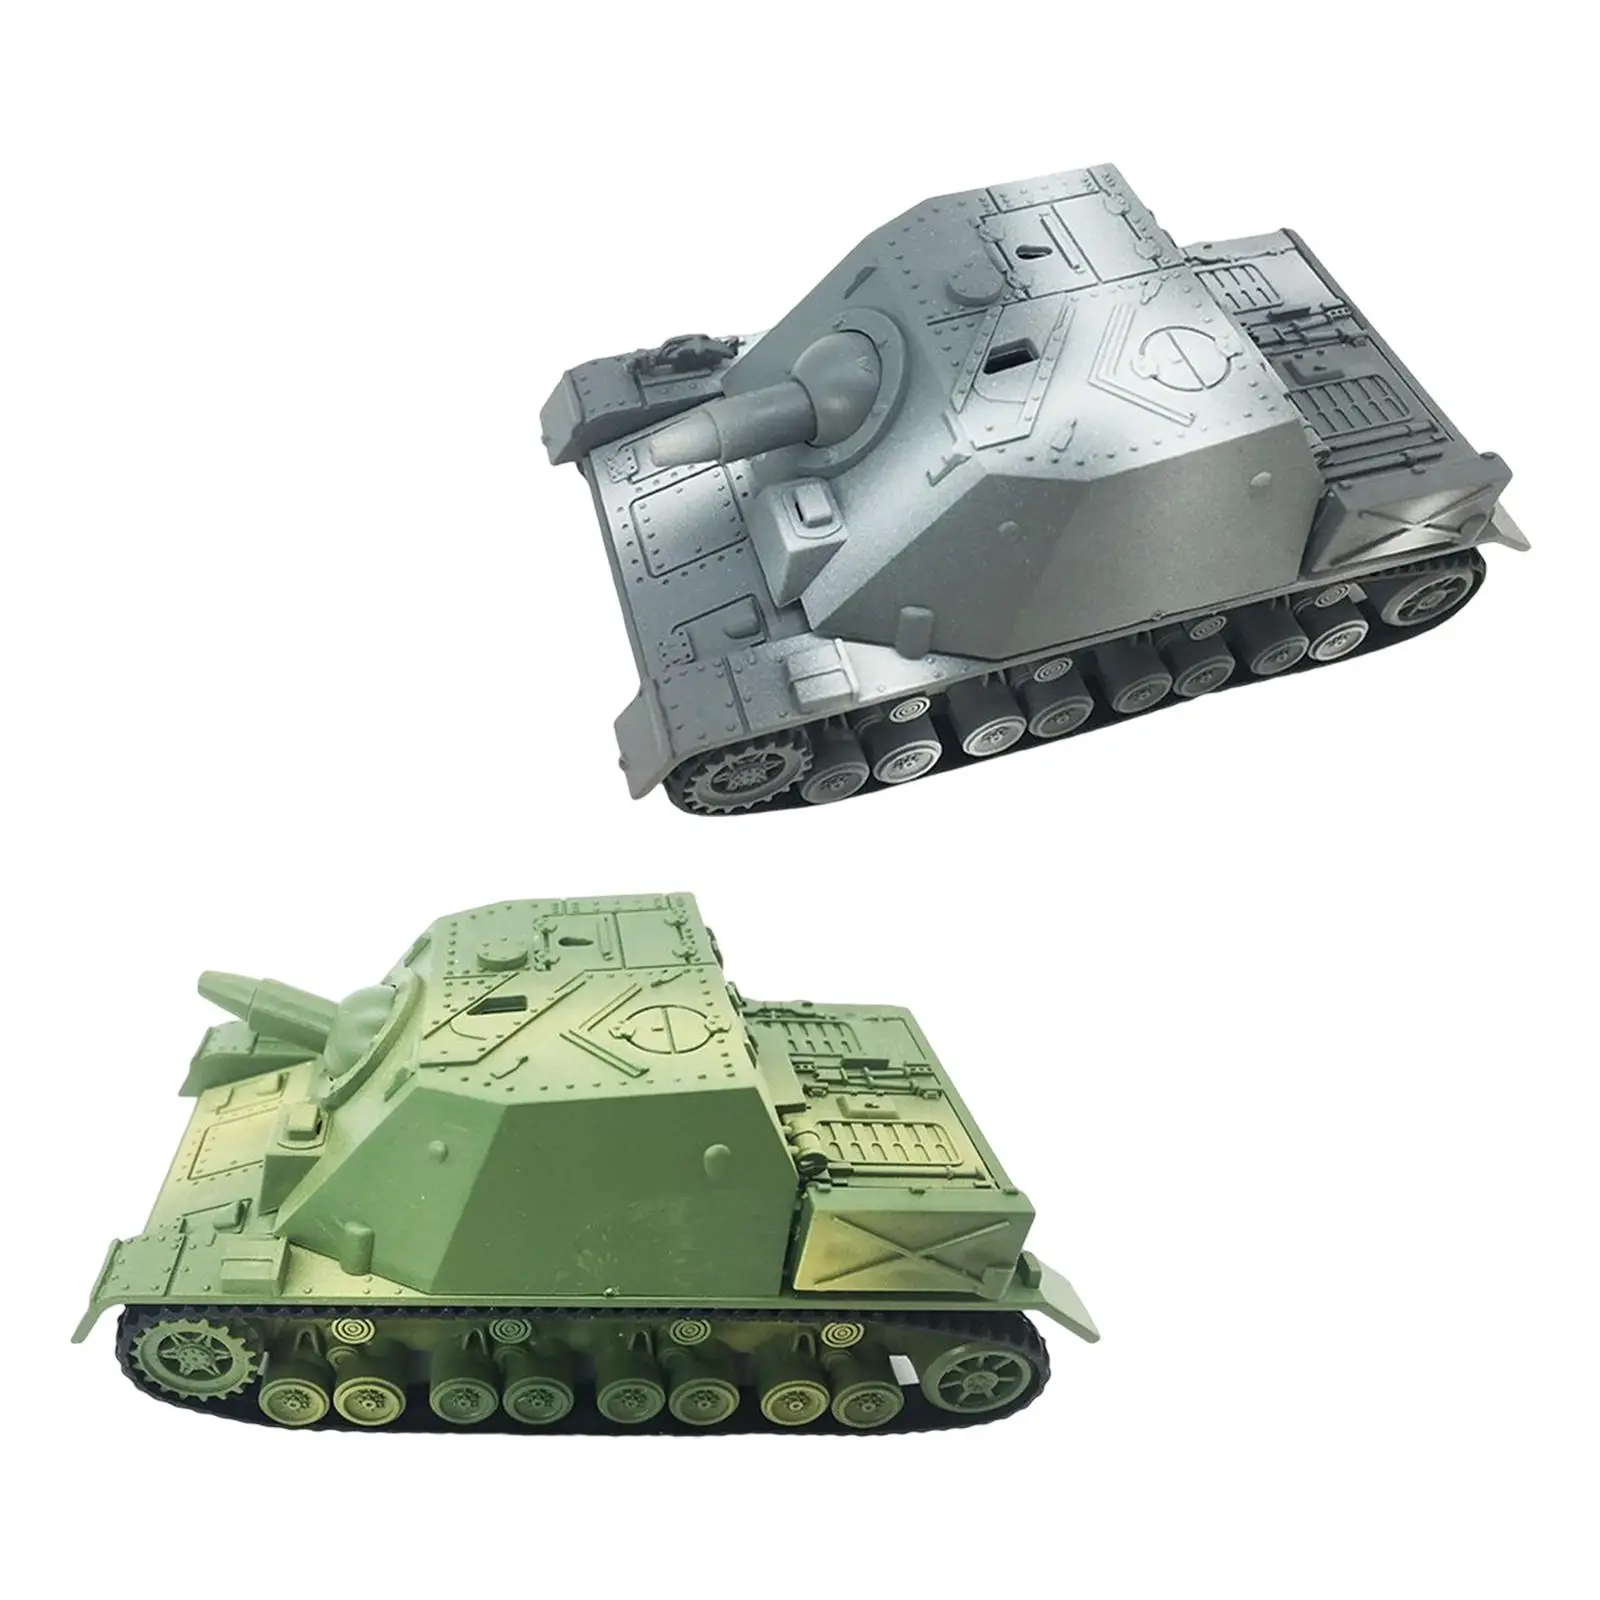 Simulation 1/72 4D Assemble Tank Sand Table Decor Armored Vehicle Toy Tank for Kids